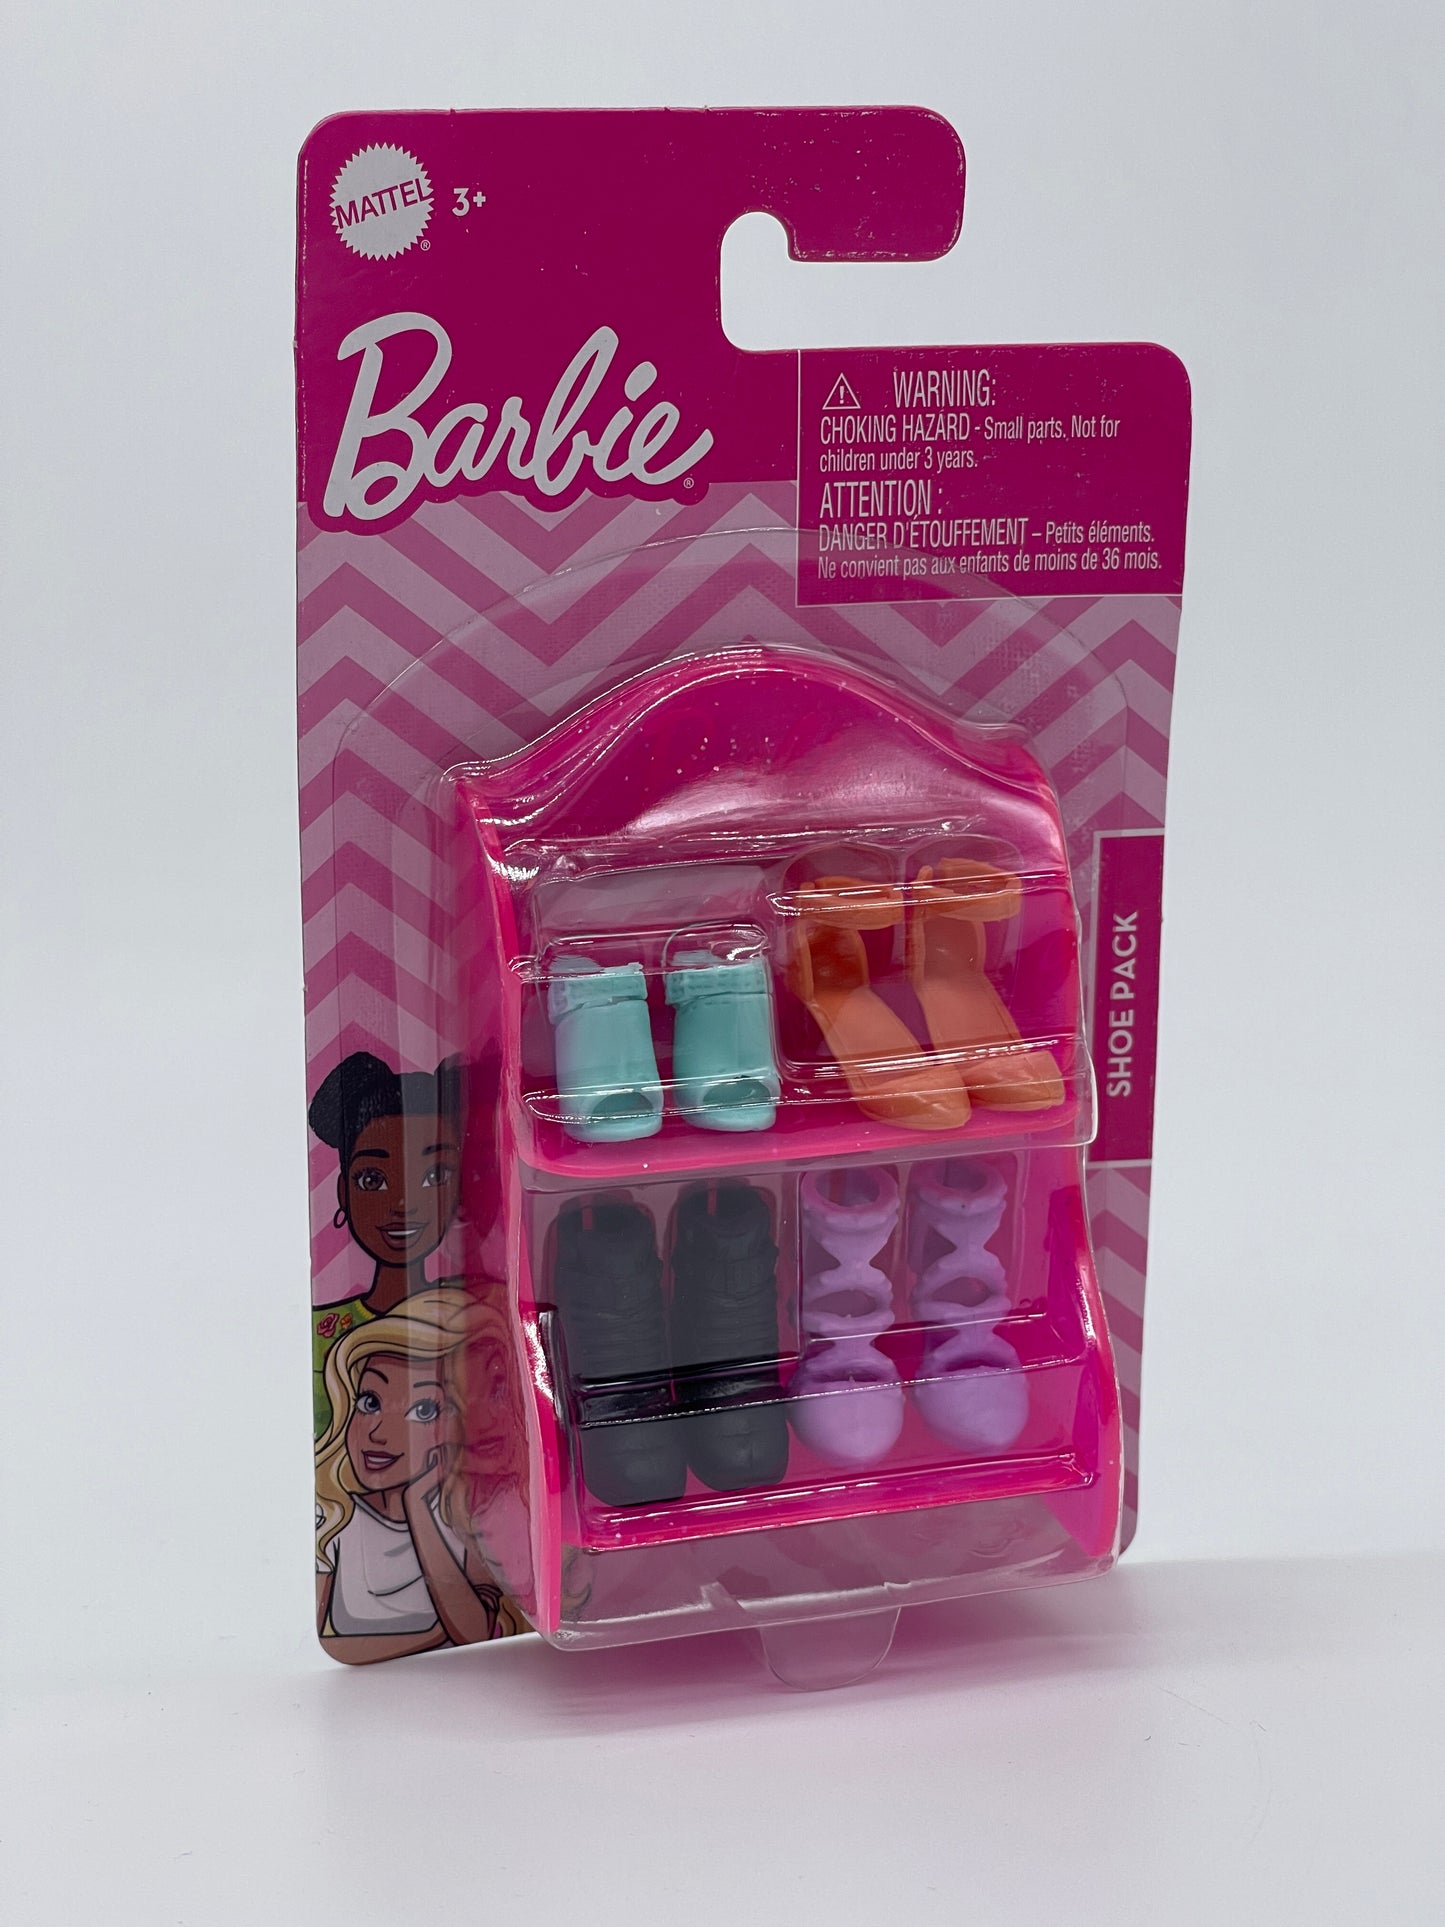 Barbie accessories accessories shelf with shoe pack, handbags, head and neck jewelry